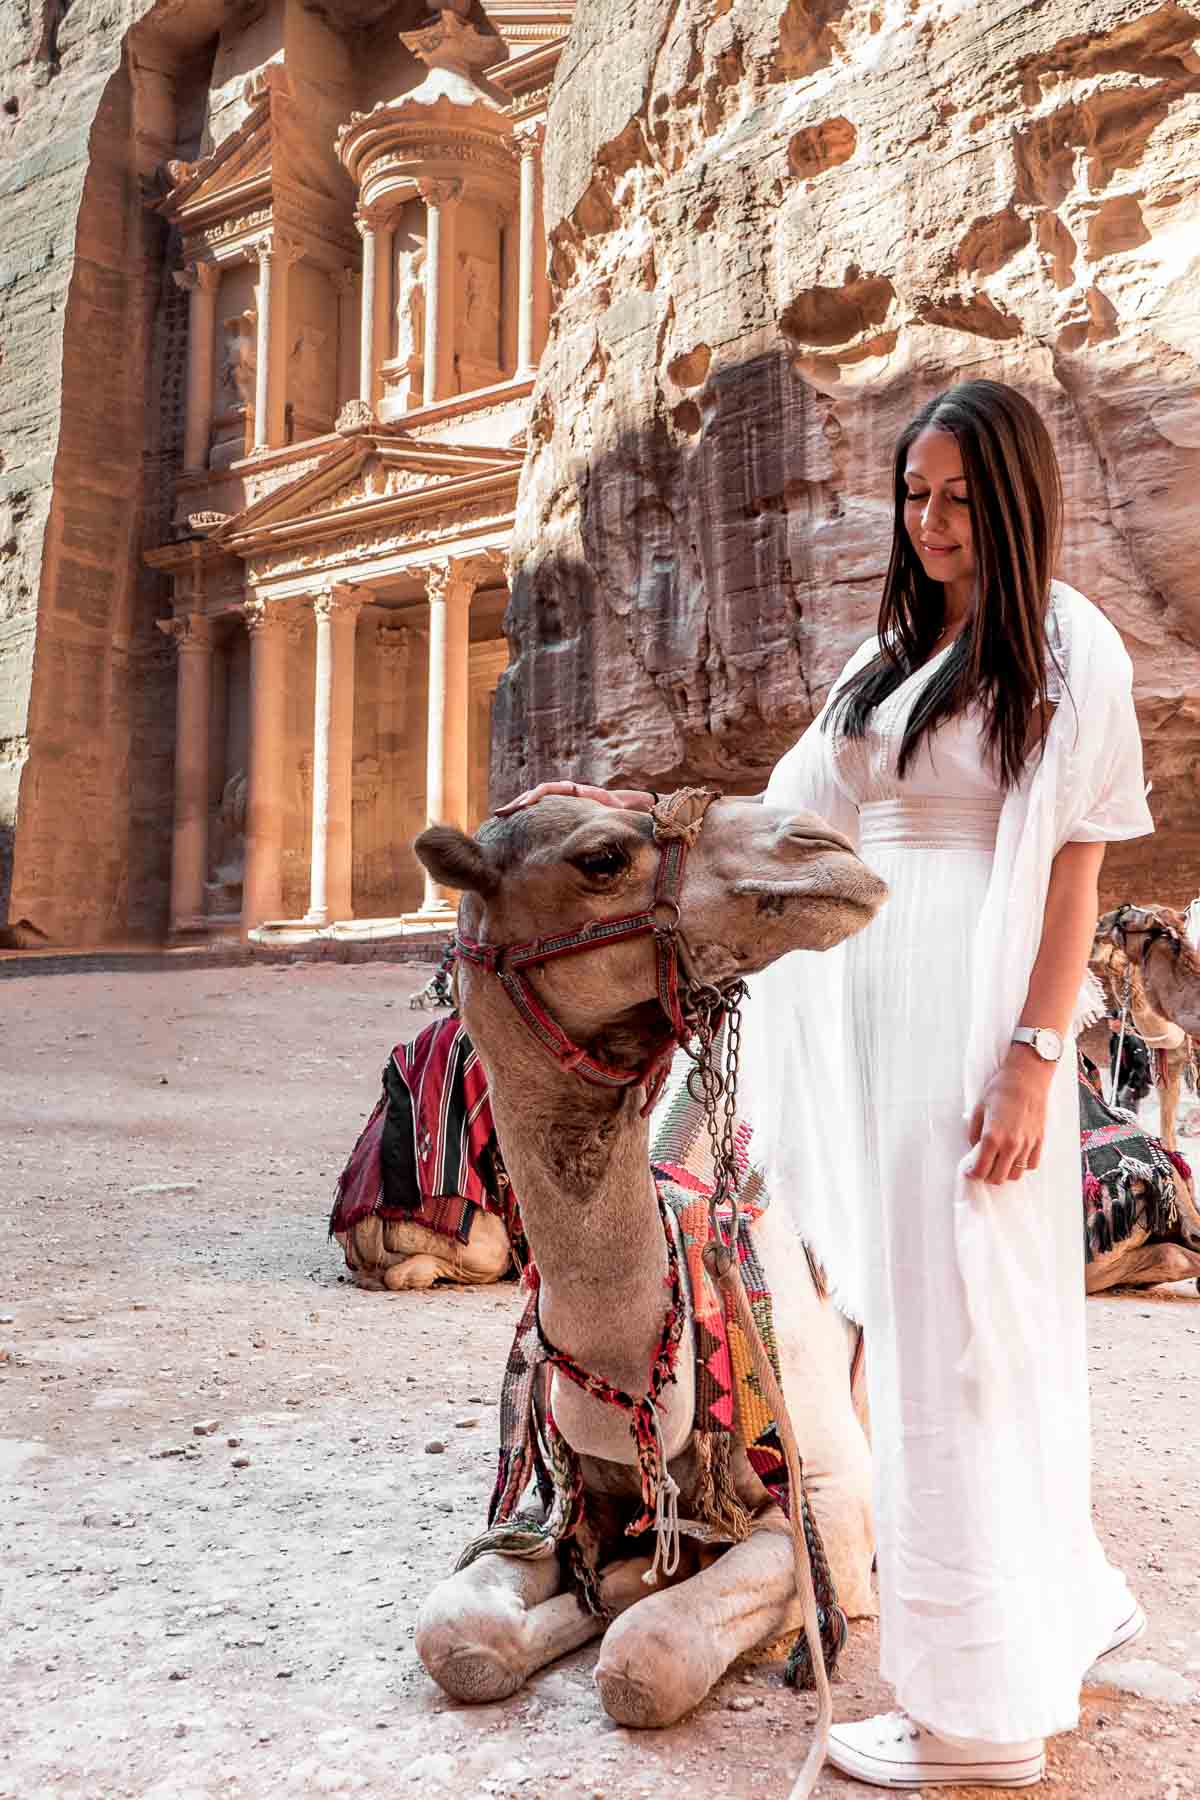 Girl in a white dress standing next to a camel with the Treasury in the background at Petra, Jordan